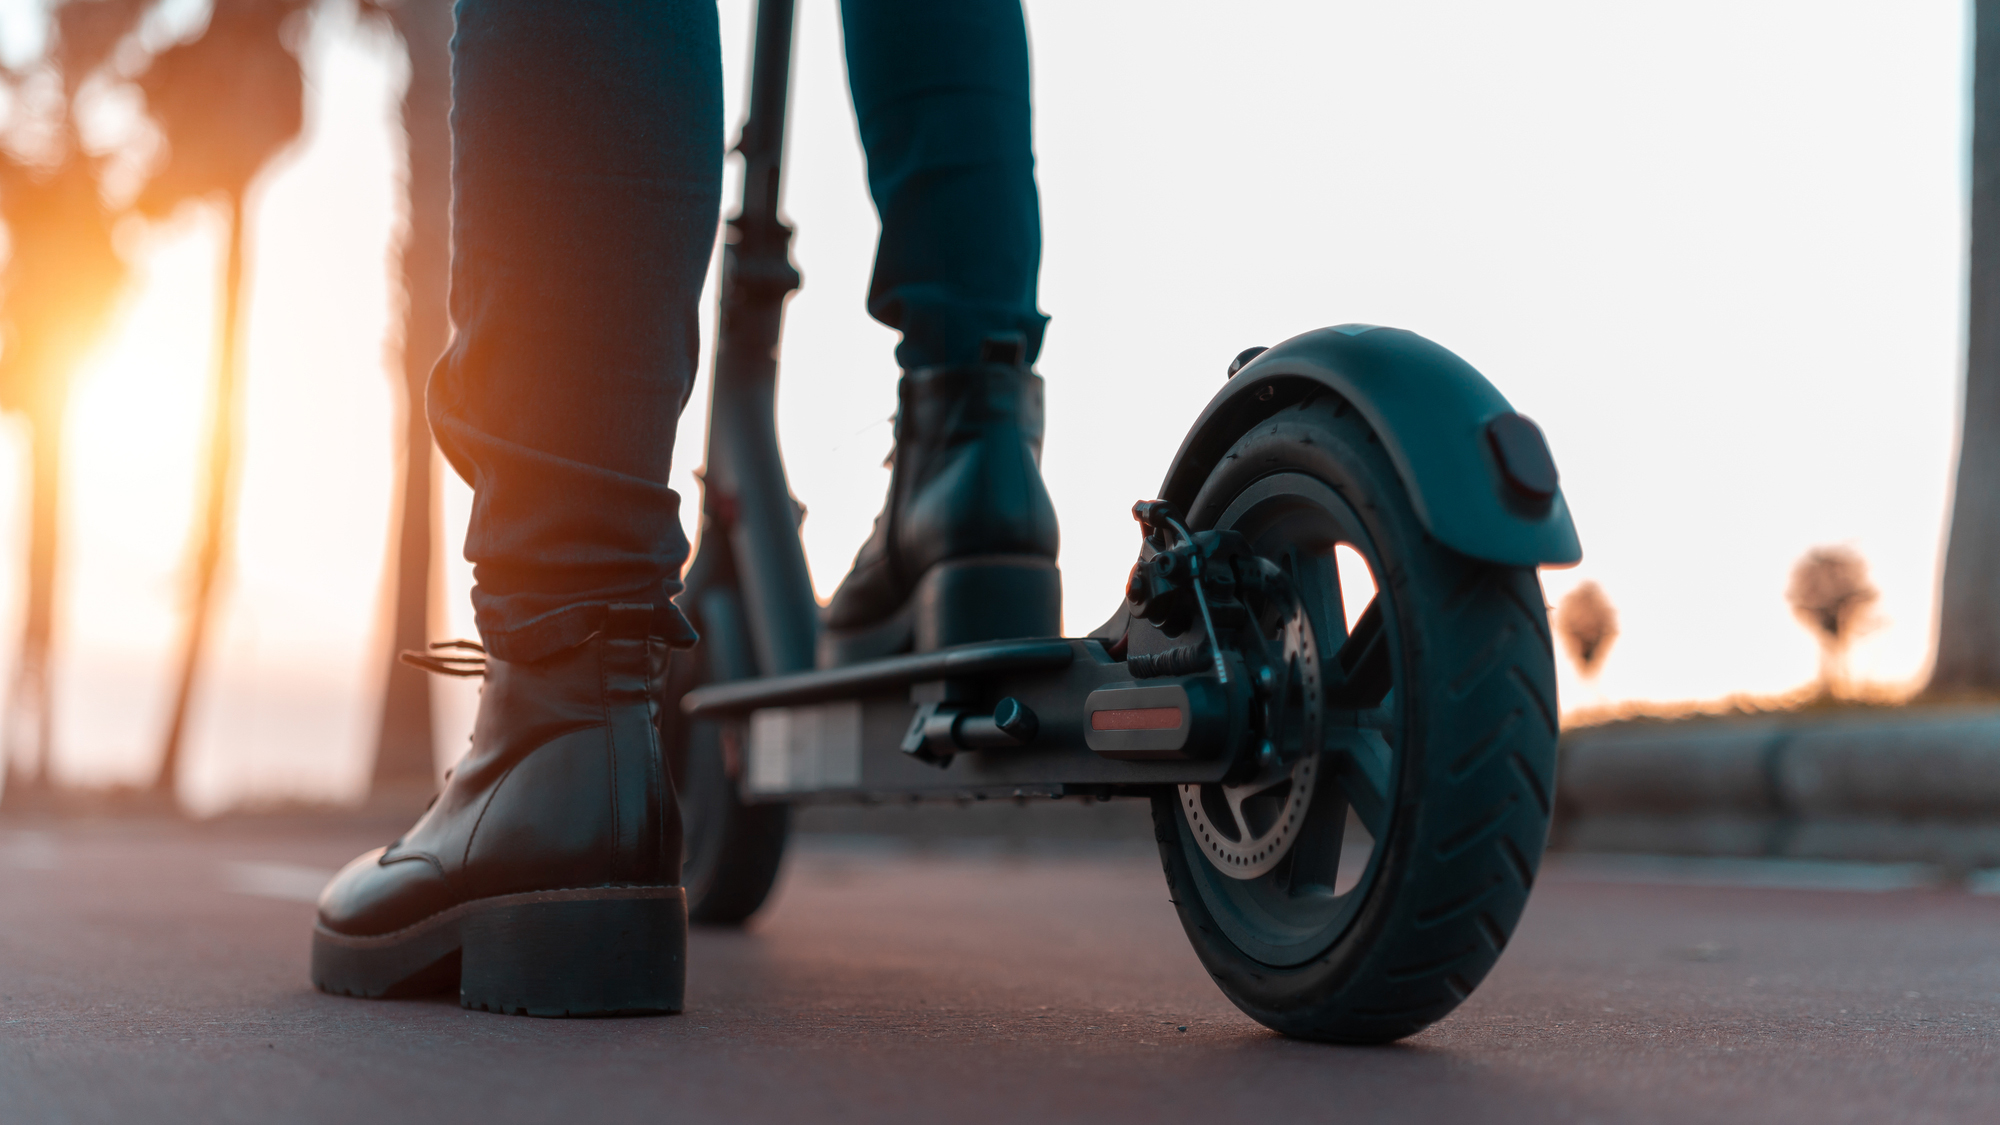 Ultimately, researchers see two factors that determine the overall climate impact of e-scooters: how users ride them, and how operators manage them from manufacturing to disposal.